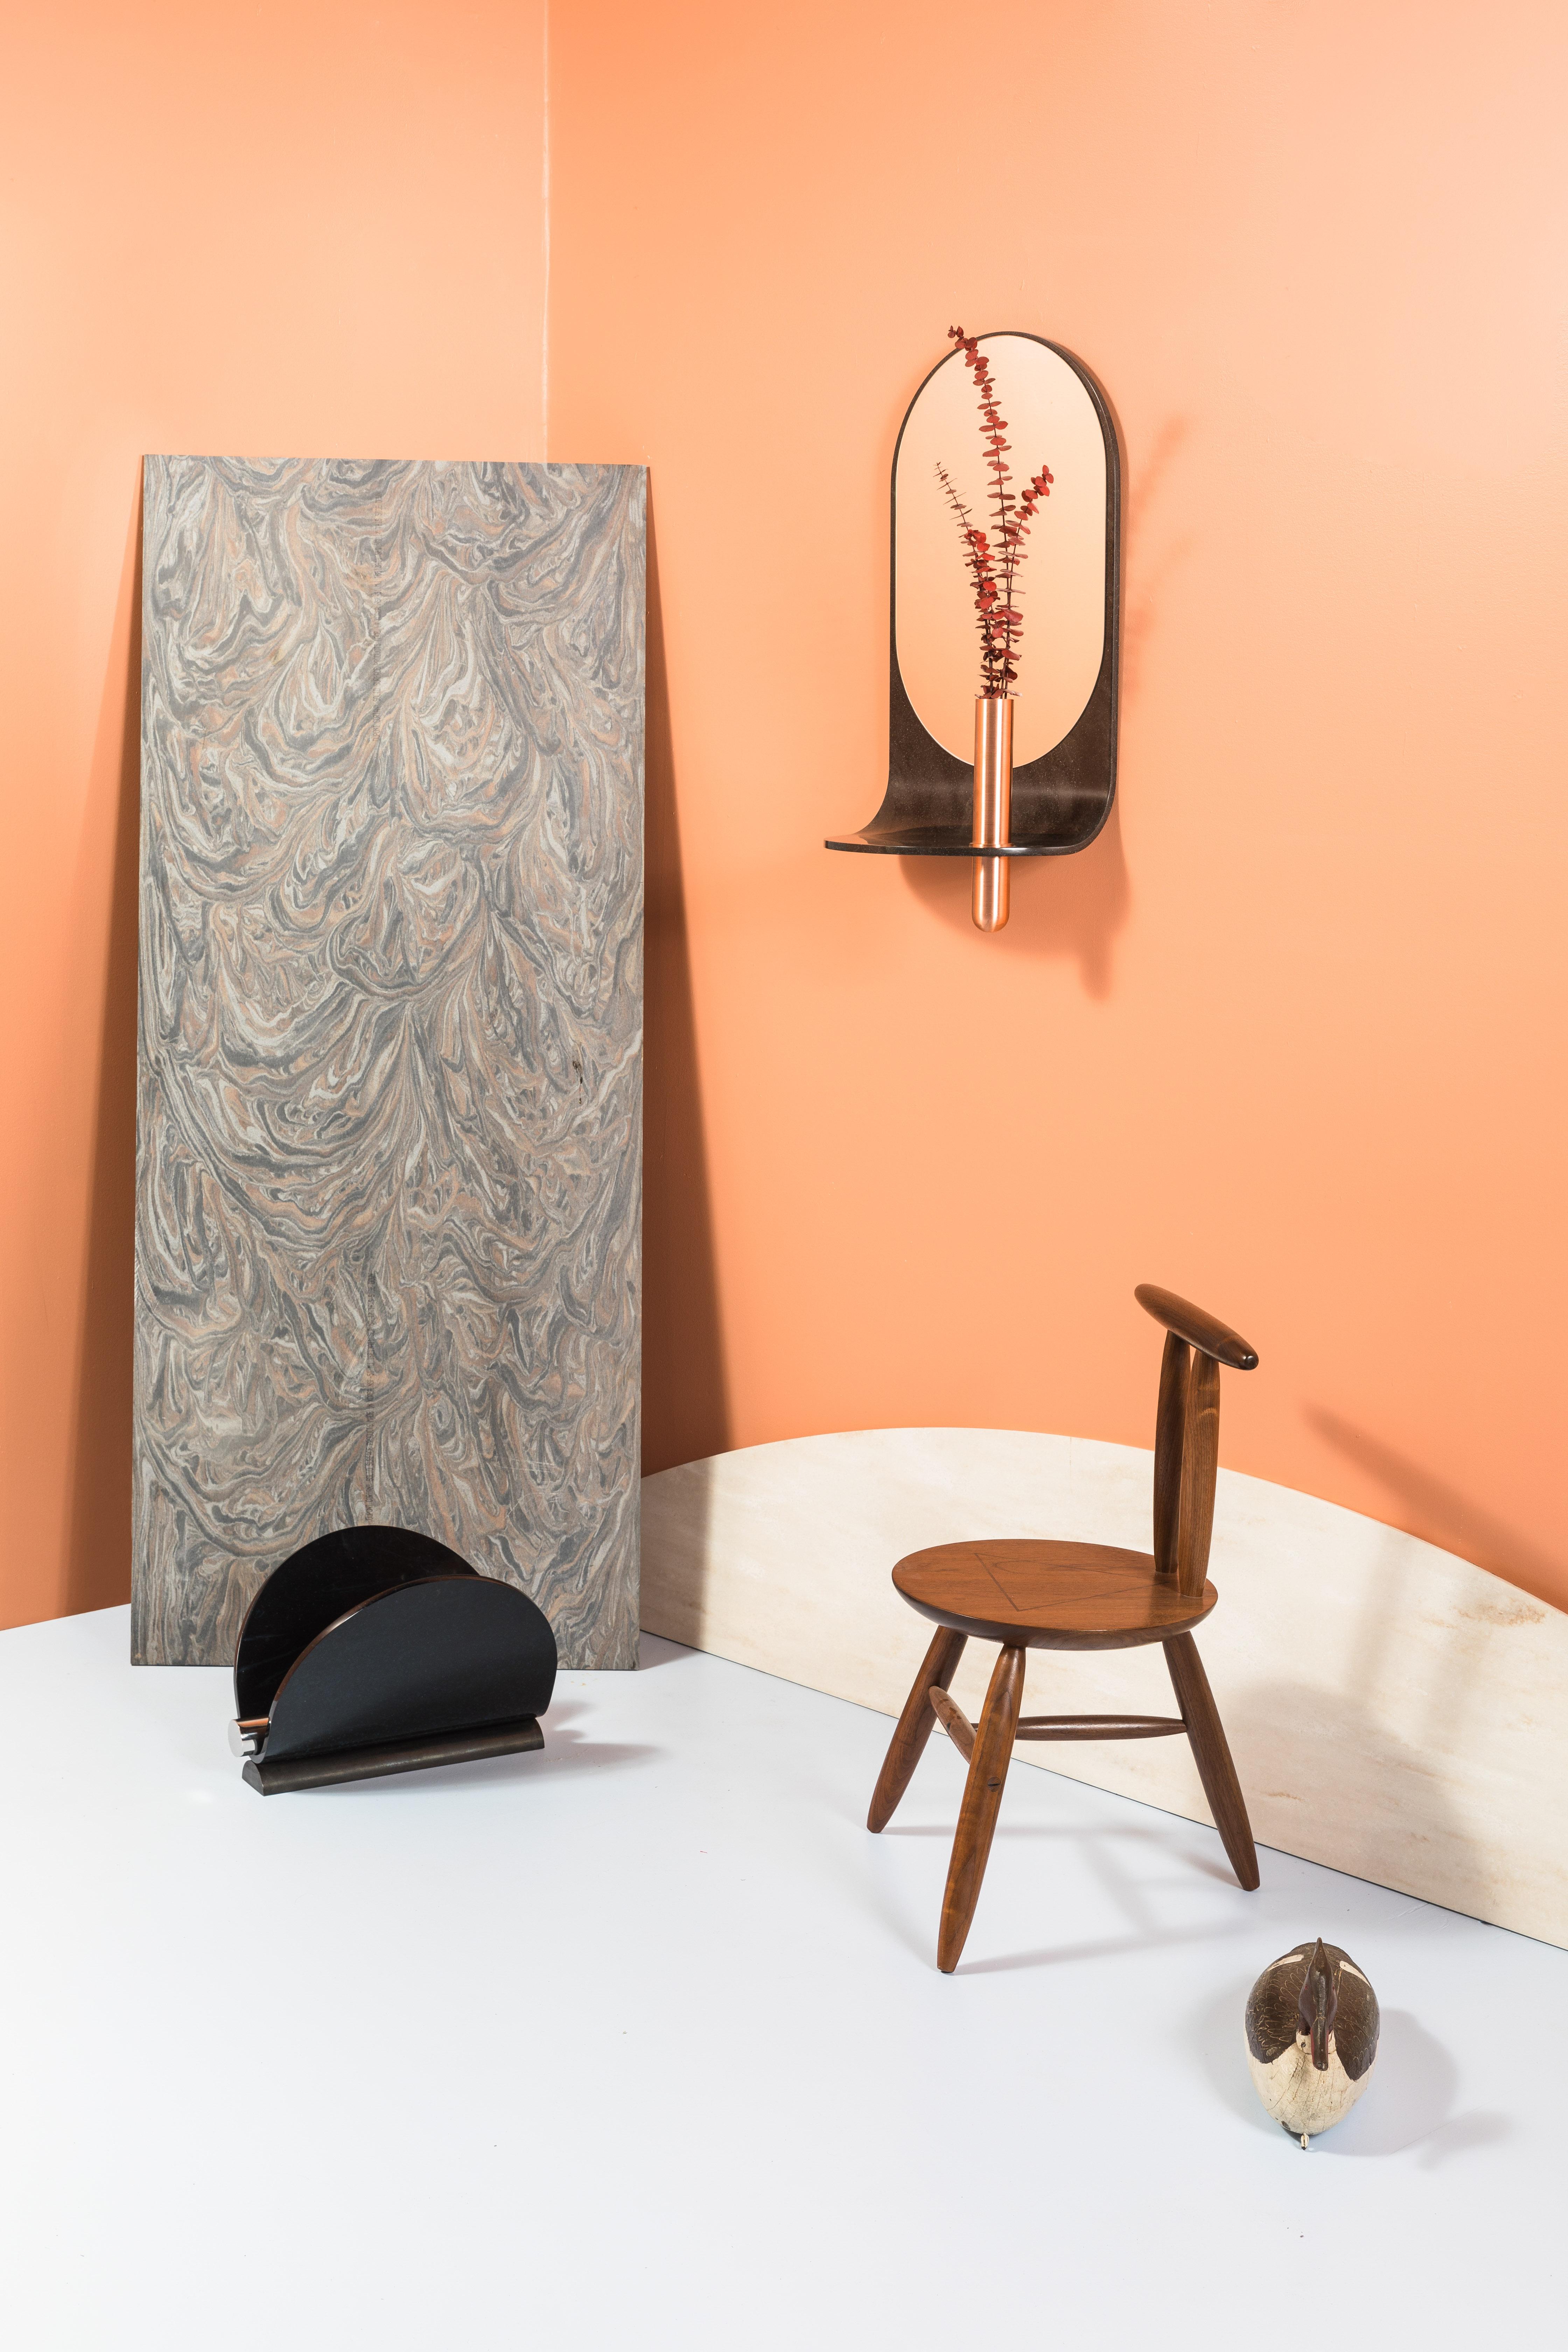 Flats, rounds, mirrored geometries, and streamlined profiles define the Swoop Mirror. Made from thermoformed artificial stone and bronze and crafted my hand. Perfect for entryways or hall areas, it gracefully integrates a storage shelf, a vase, and